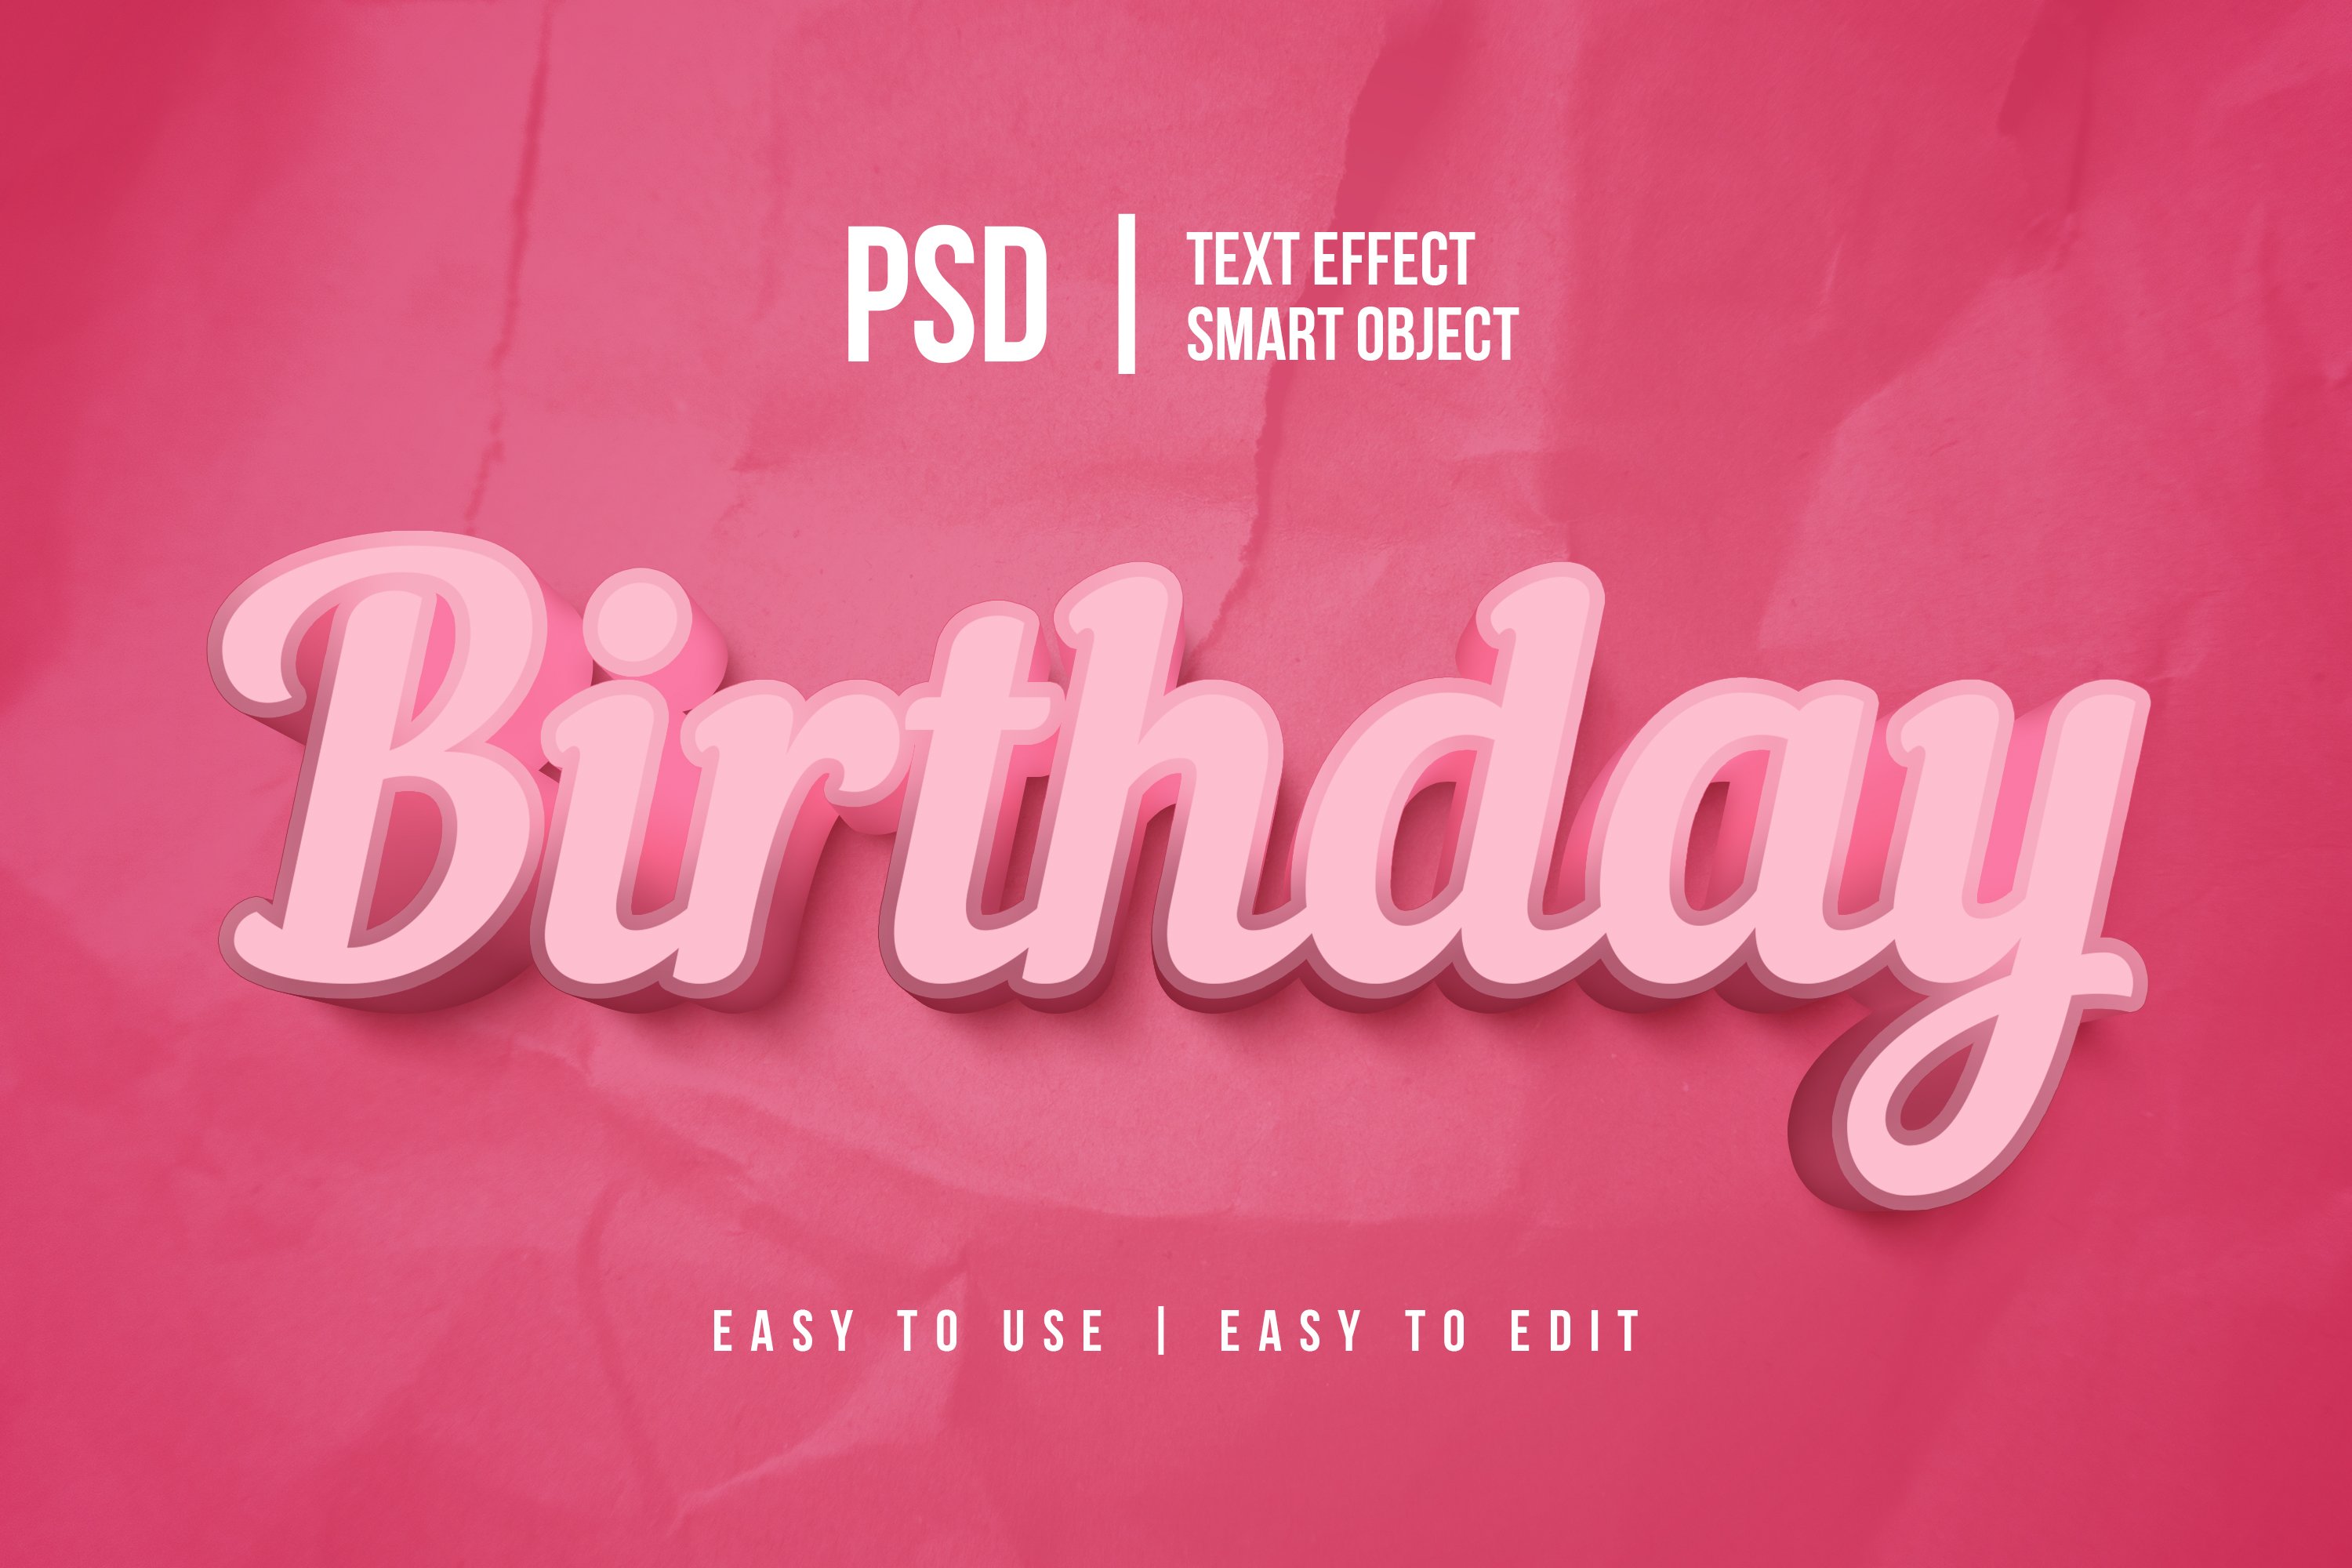 birthday text effect with pink colorcover image.